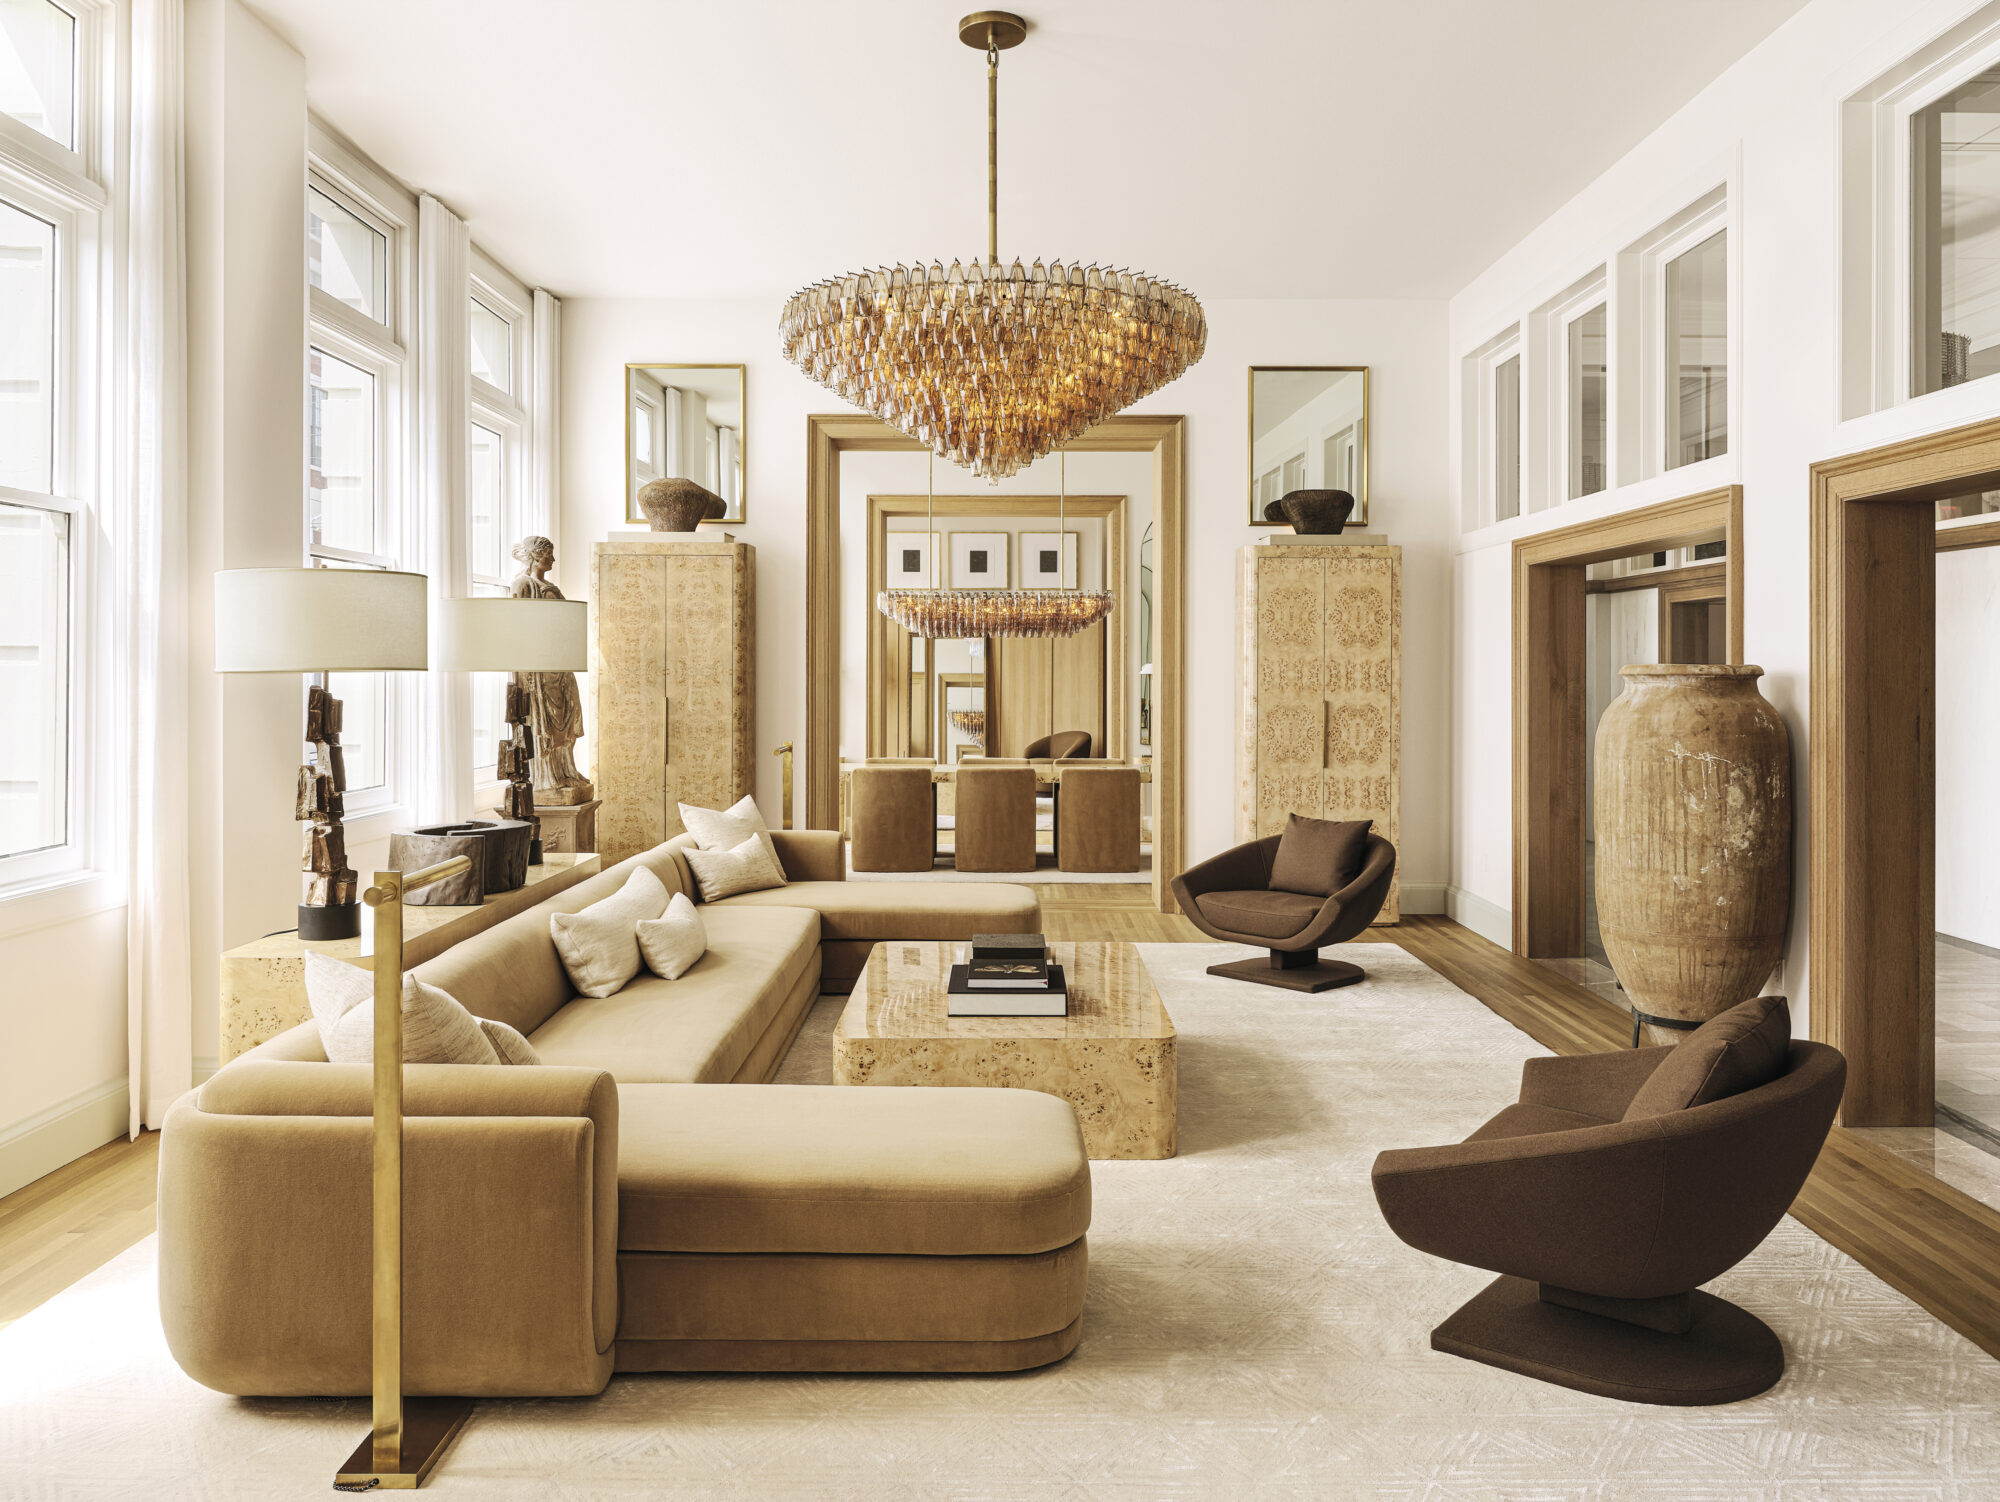 RH showroom space with neutral furnishings, including a taupe sectional and brown armchairs.